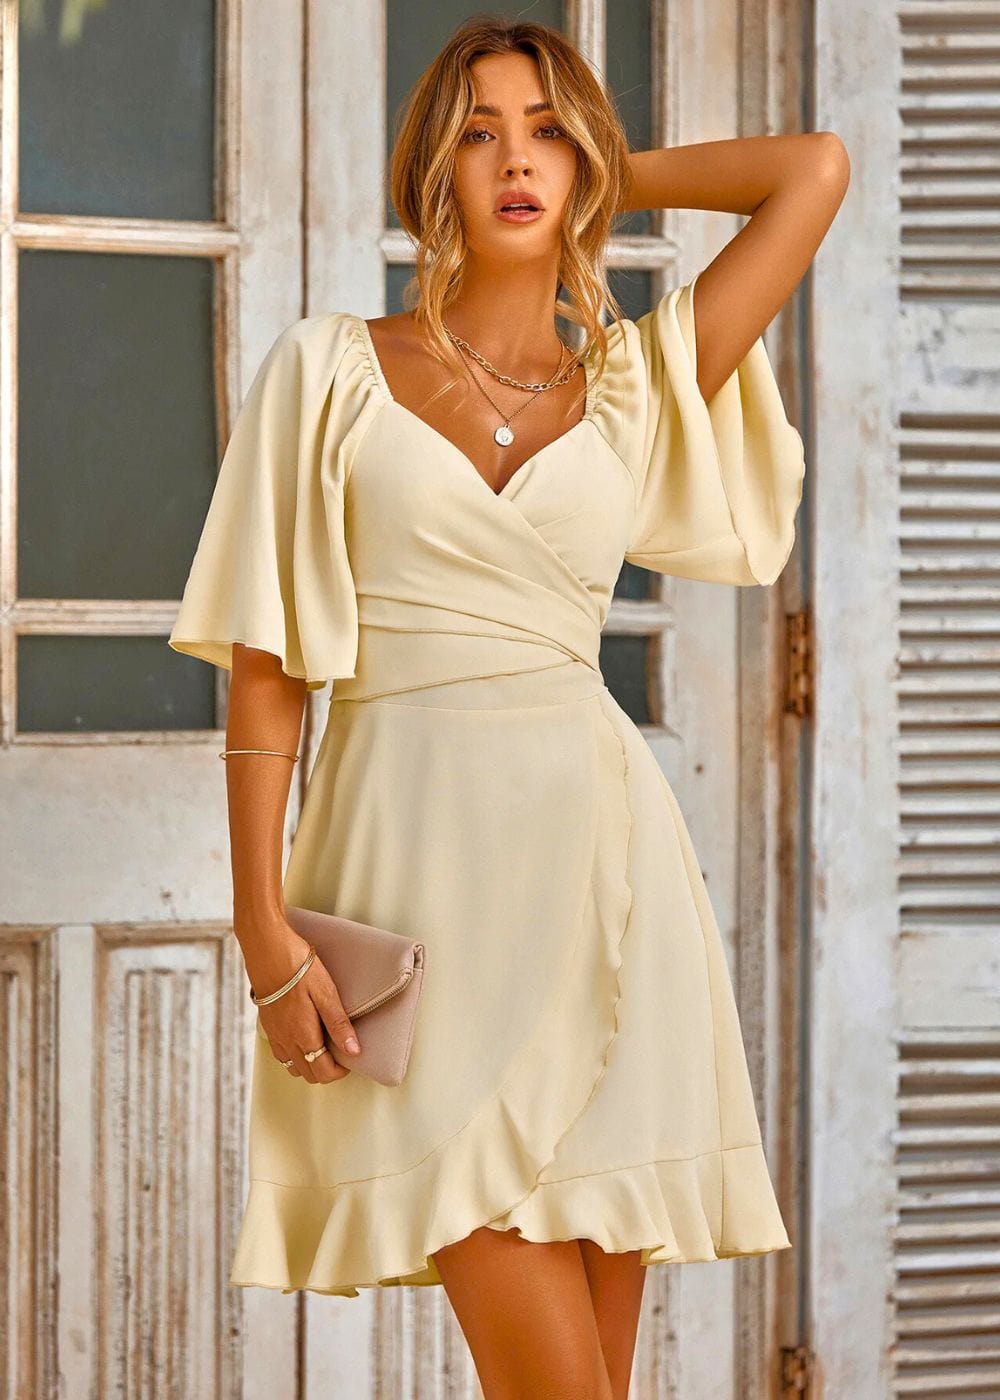 Robe Cocktail Champetre Chic